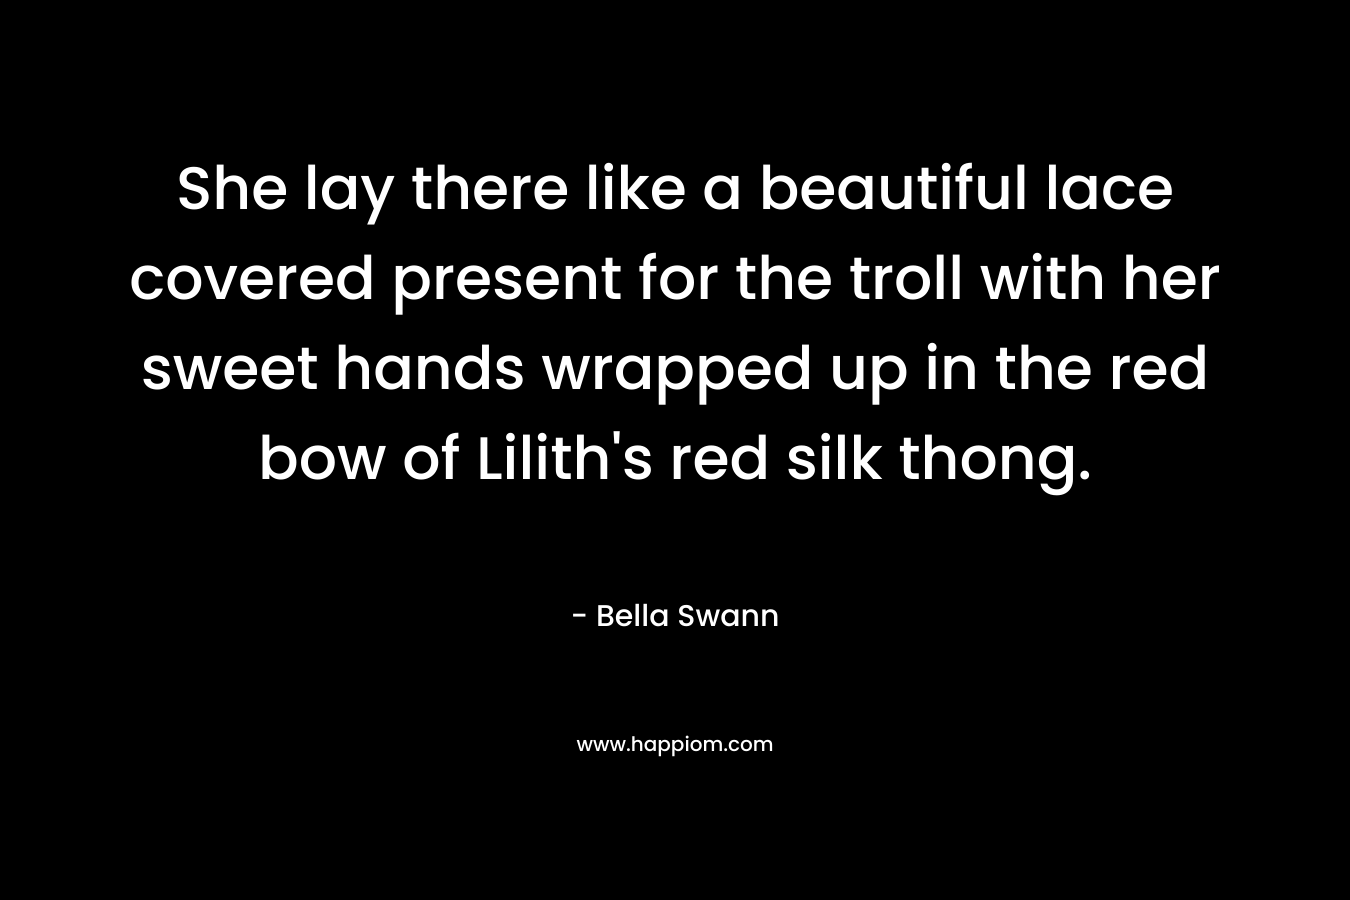 She lay there like a beautiful lace covered present for the troll with her sweet hands wrapped up in the red bow of Lilith's red silk thong.